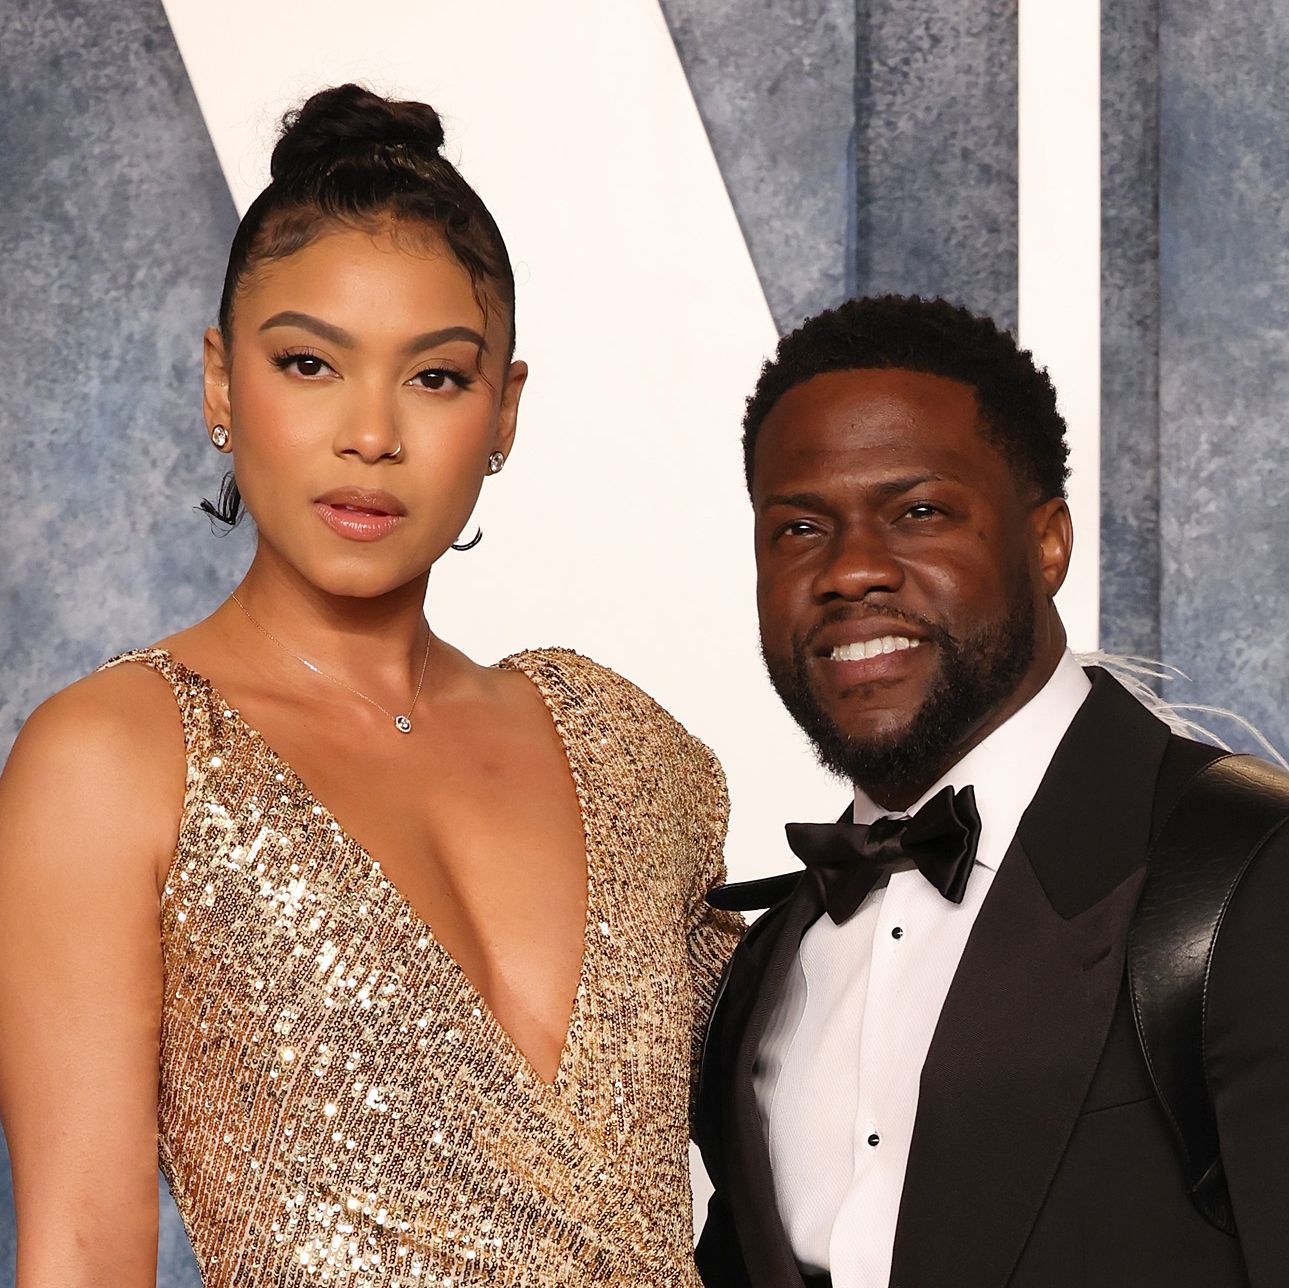 Kevin Hart’s Wife, Eniko Parrish, Stood Right by Her Husband’s Side After His Terrifying Car Crash